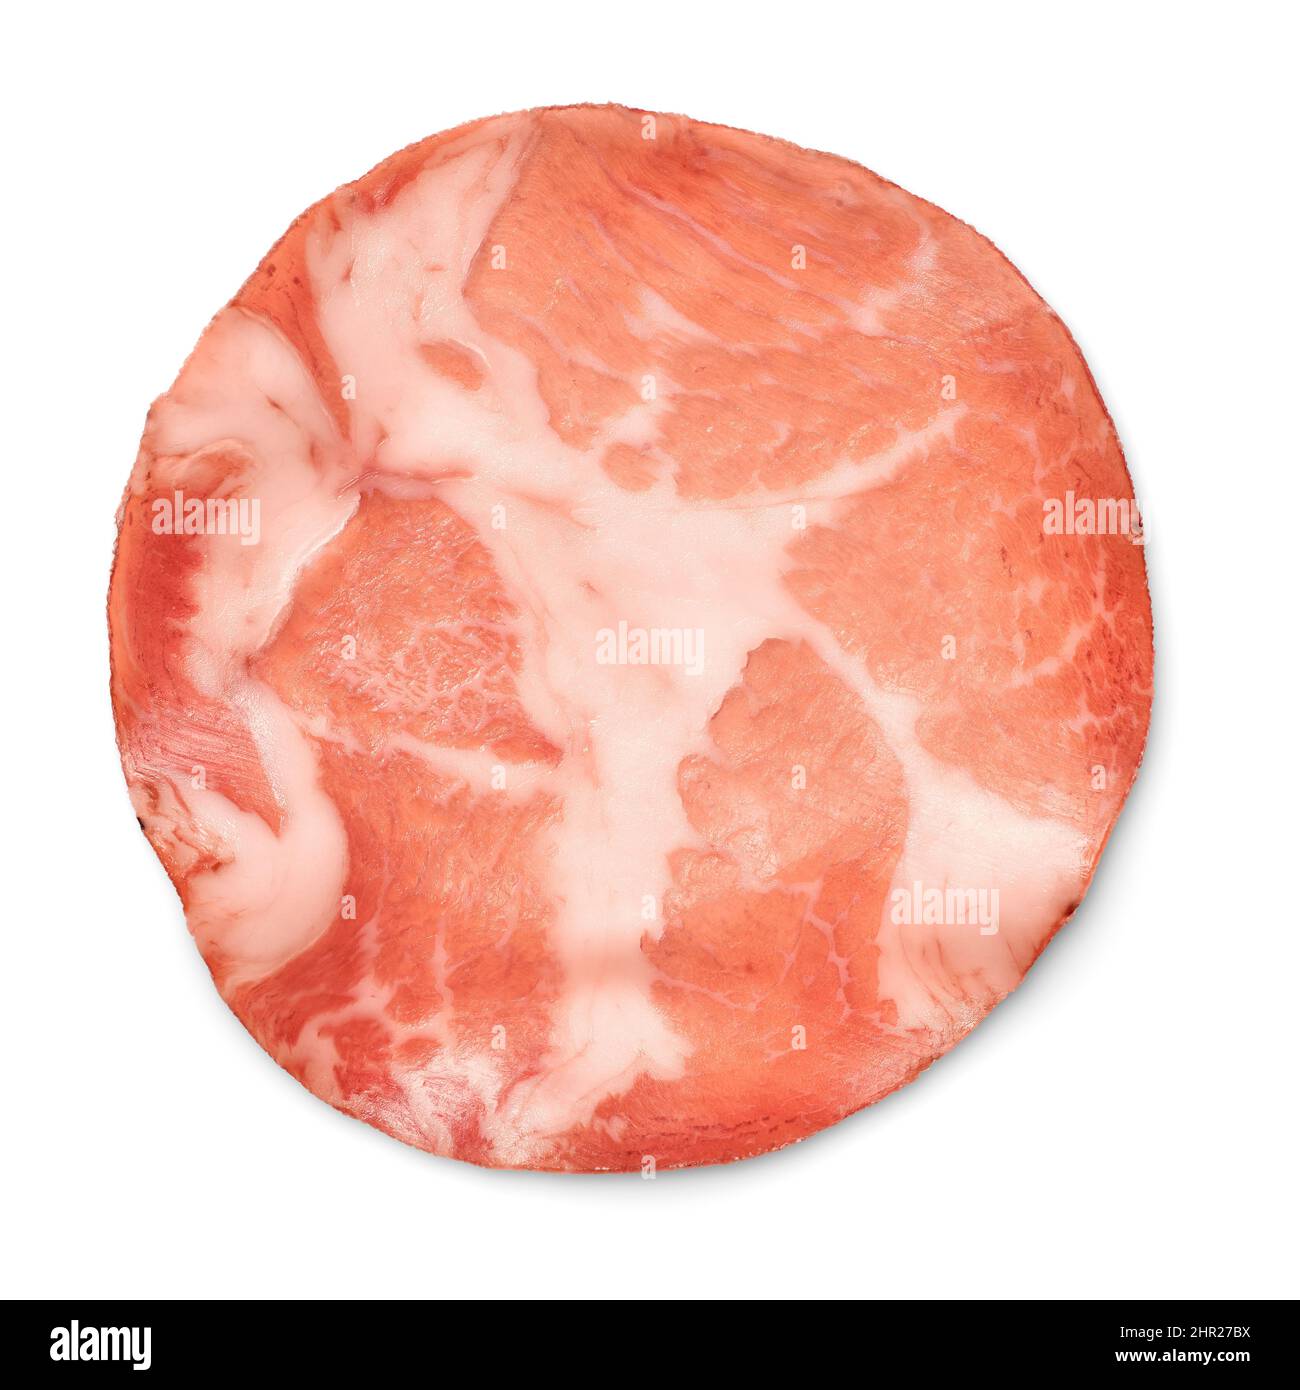 Food and drink: thin slice of cured pork meat, isolated on white background Stock Photo